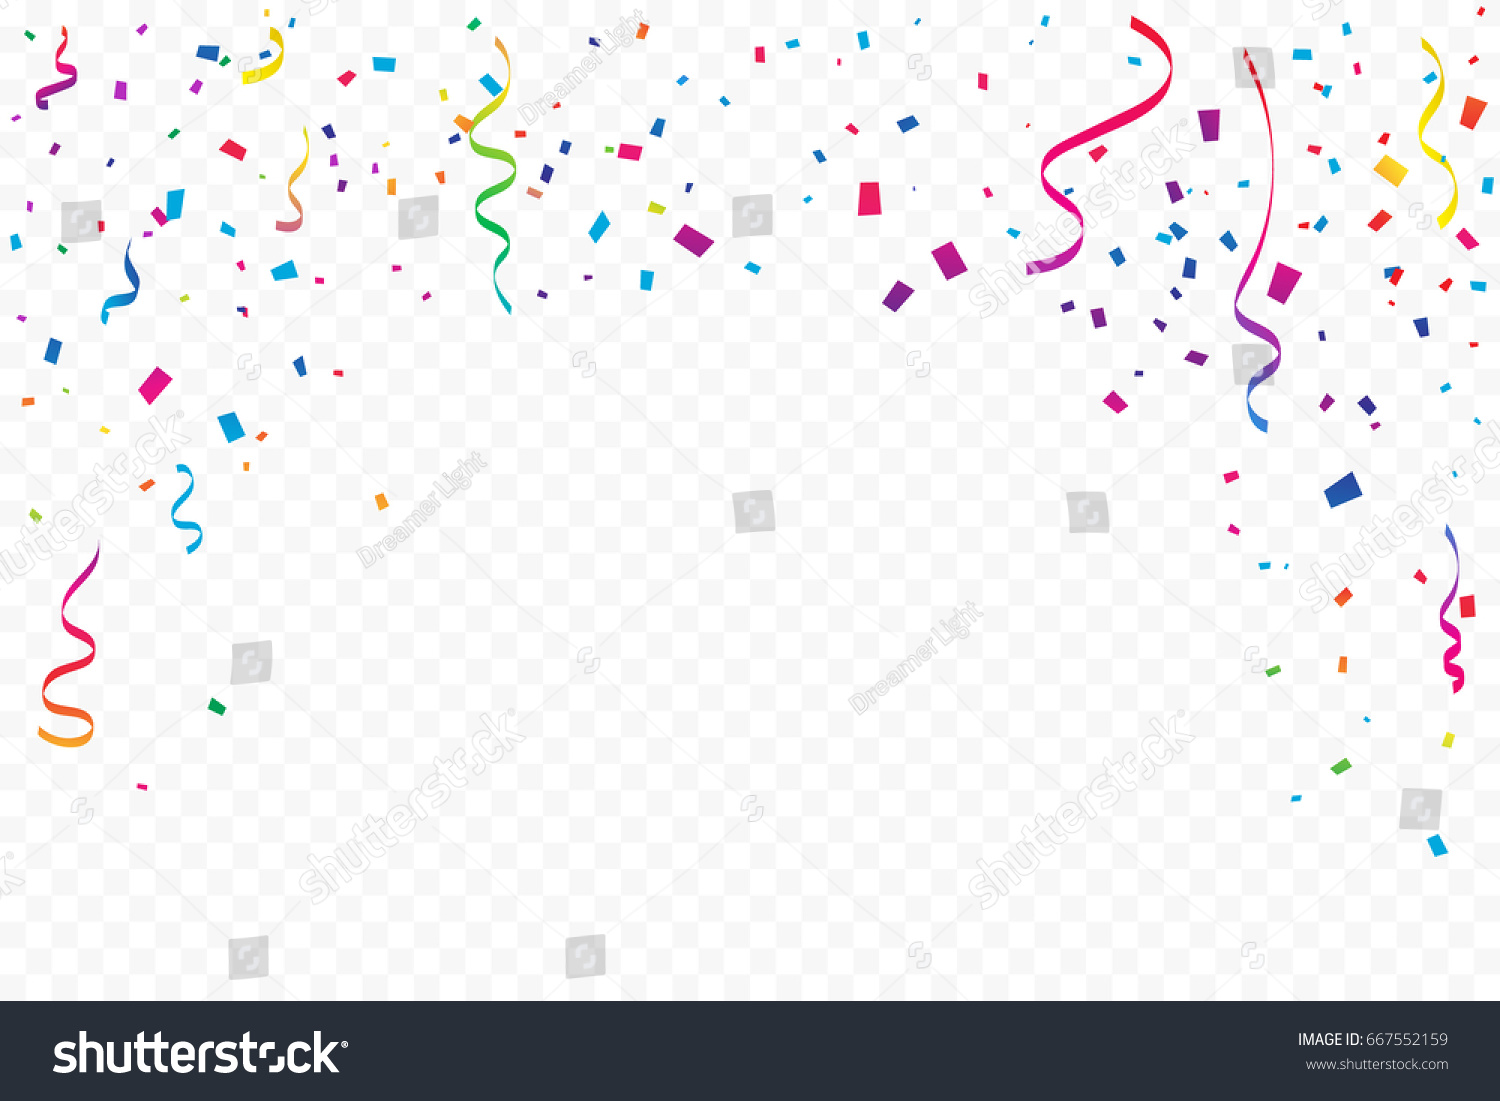 Many Falling Colorful Tiny Confetti And Ribbon On Transparent Background. Celebration Event and Party. Multicolored. Vector